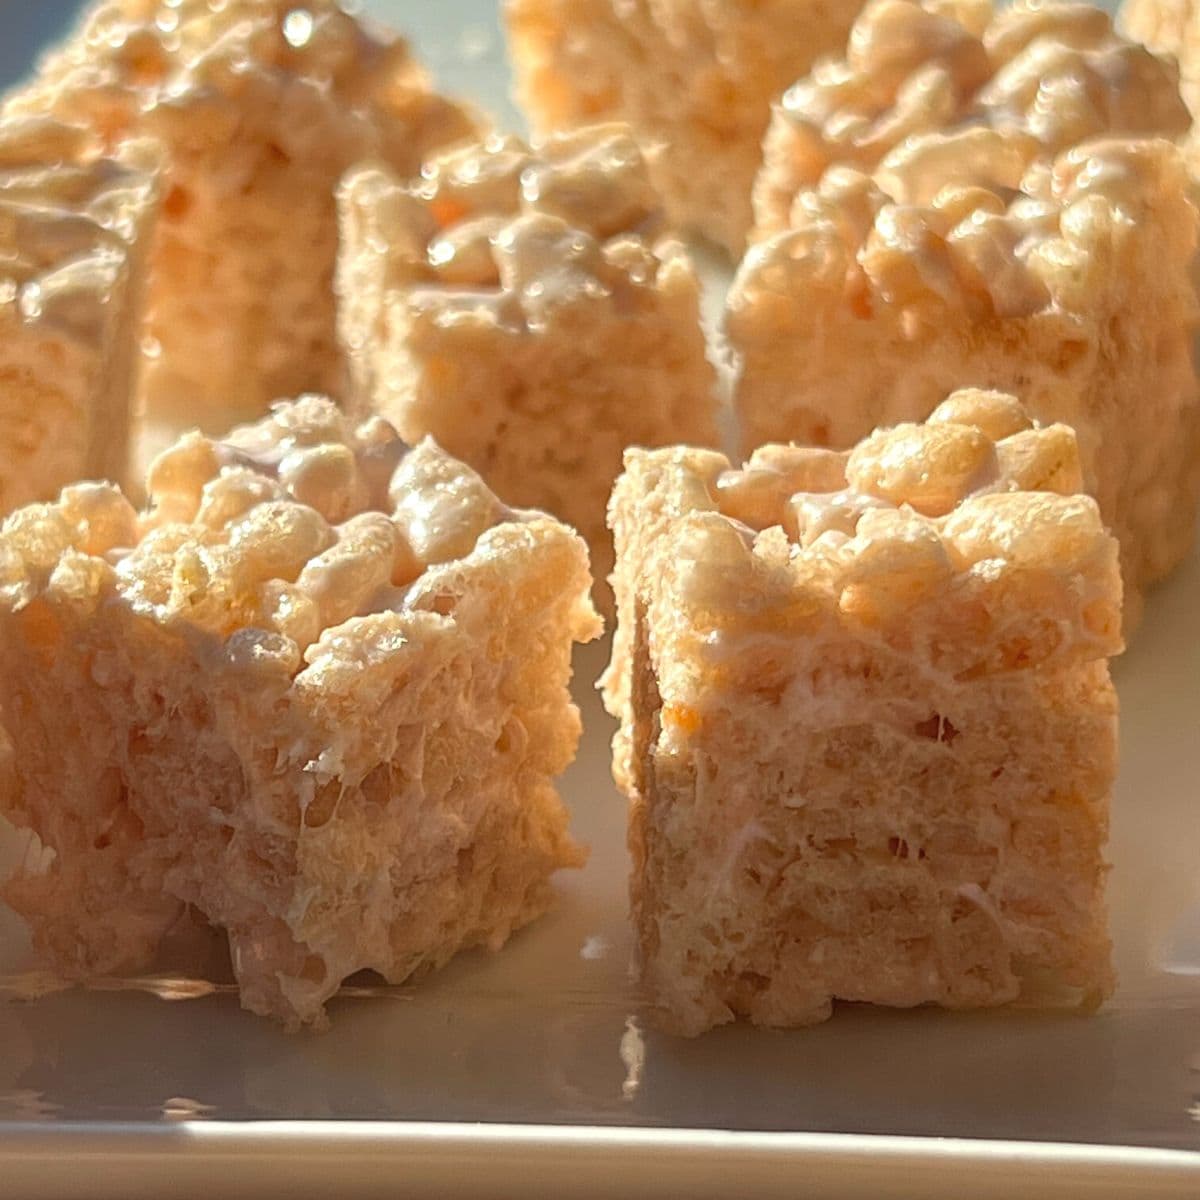 Small rice krispie squares on a plate.